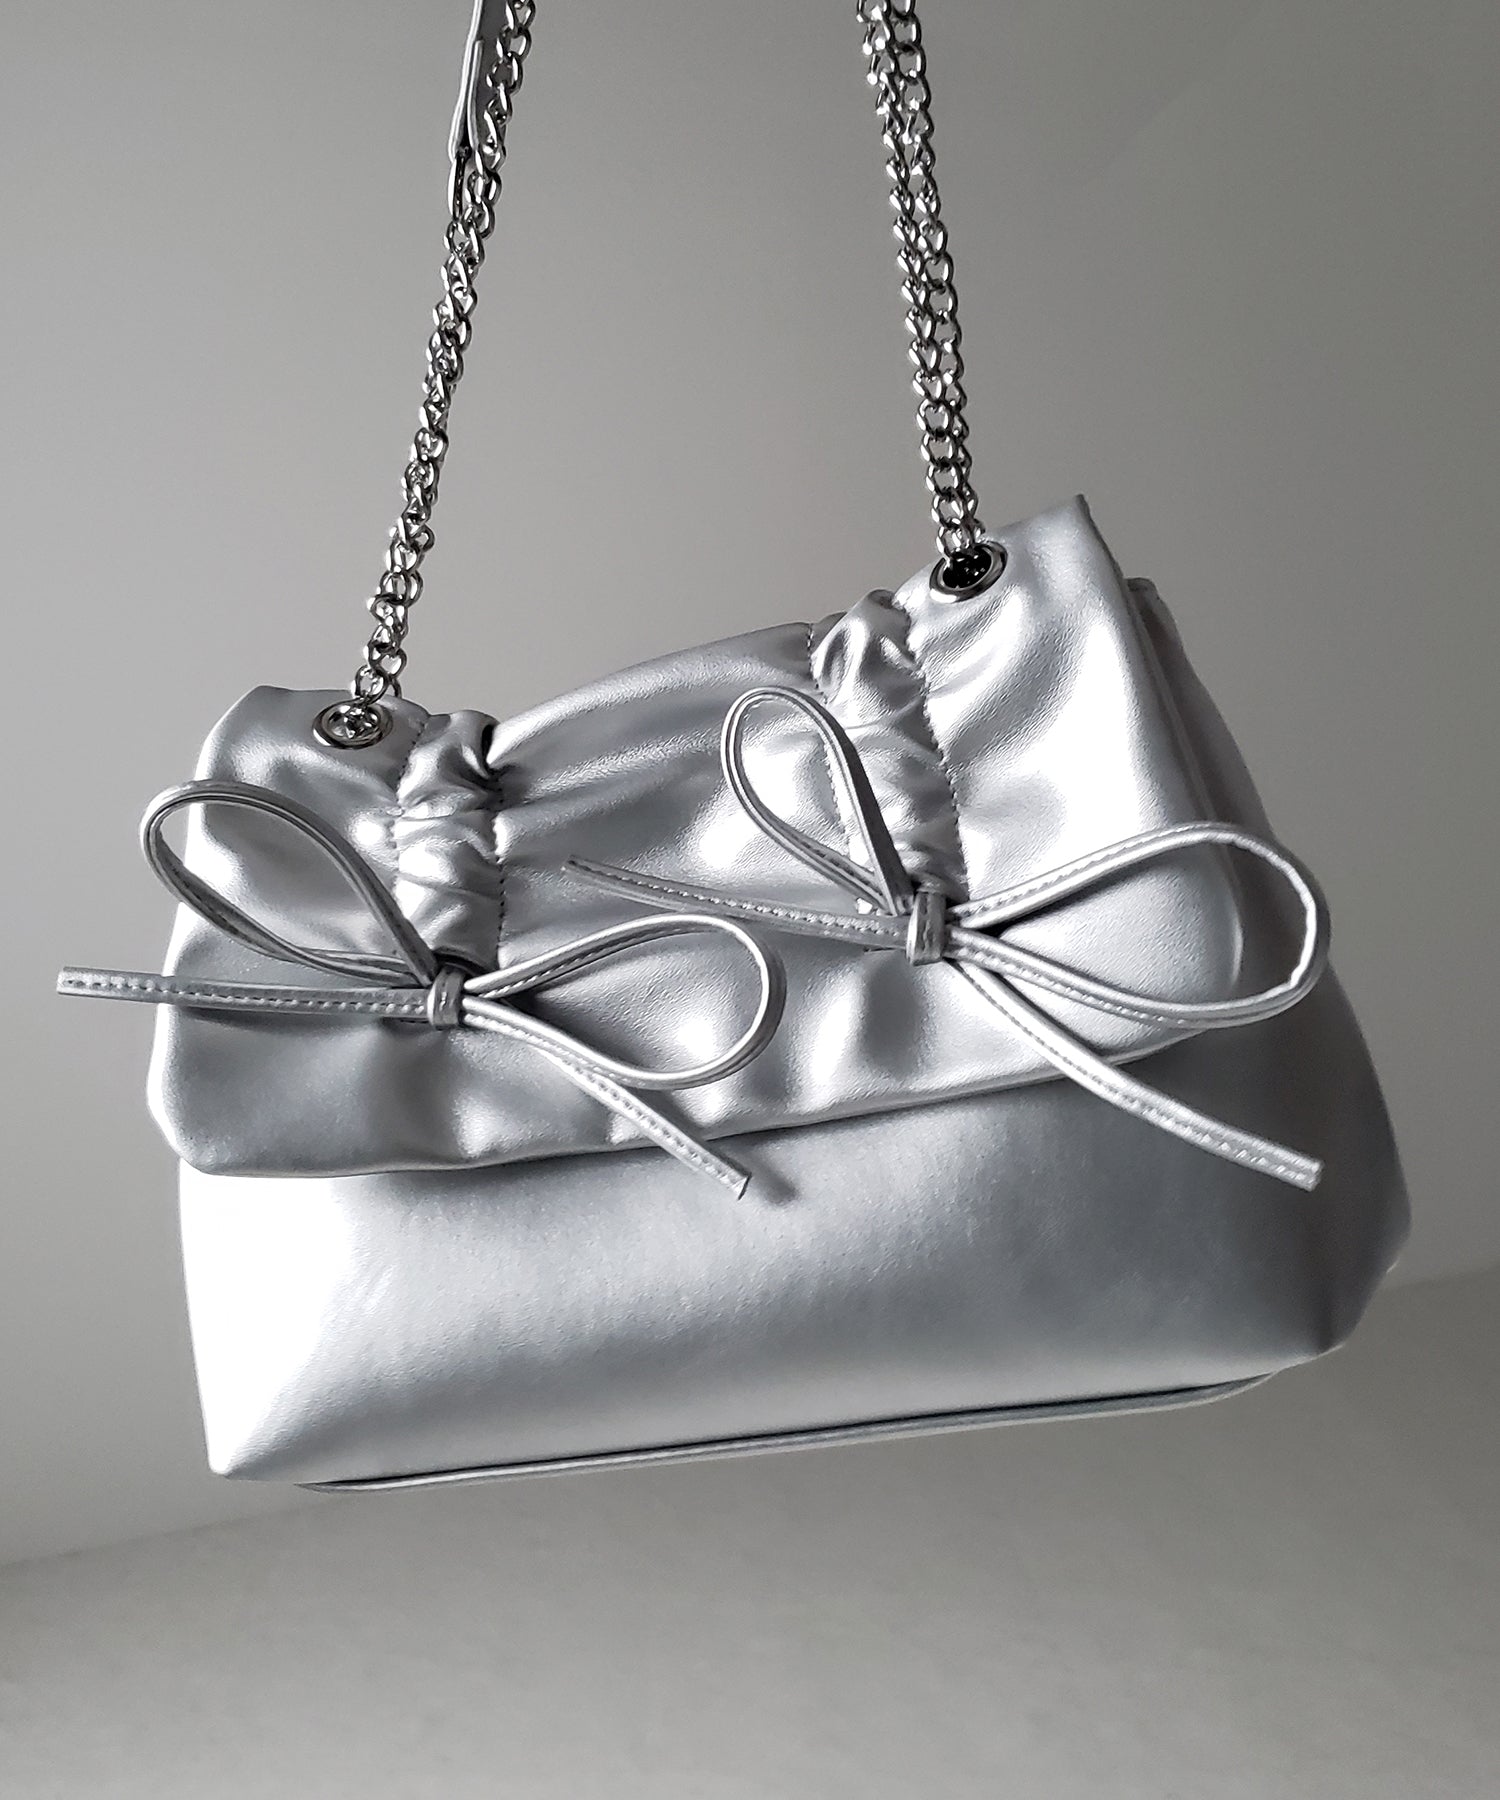 【 ３color 】ダブルリボンフェイクレザーチェーンショルダーバッグ ／ double ribbon fake leather chain shoulder bag